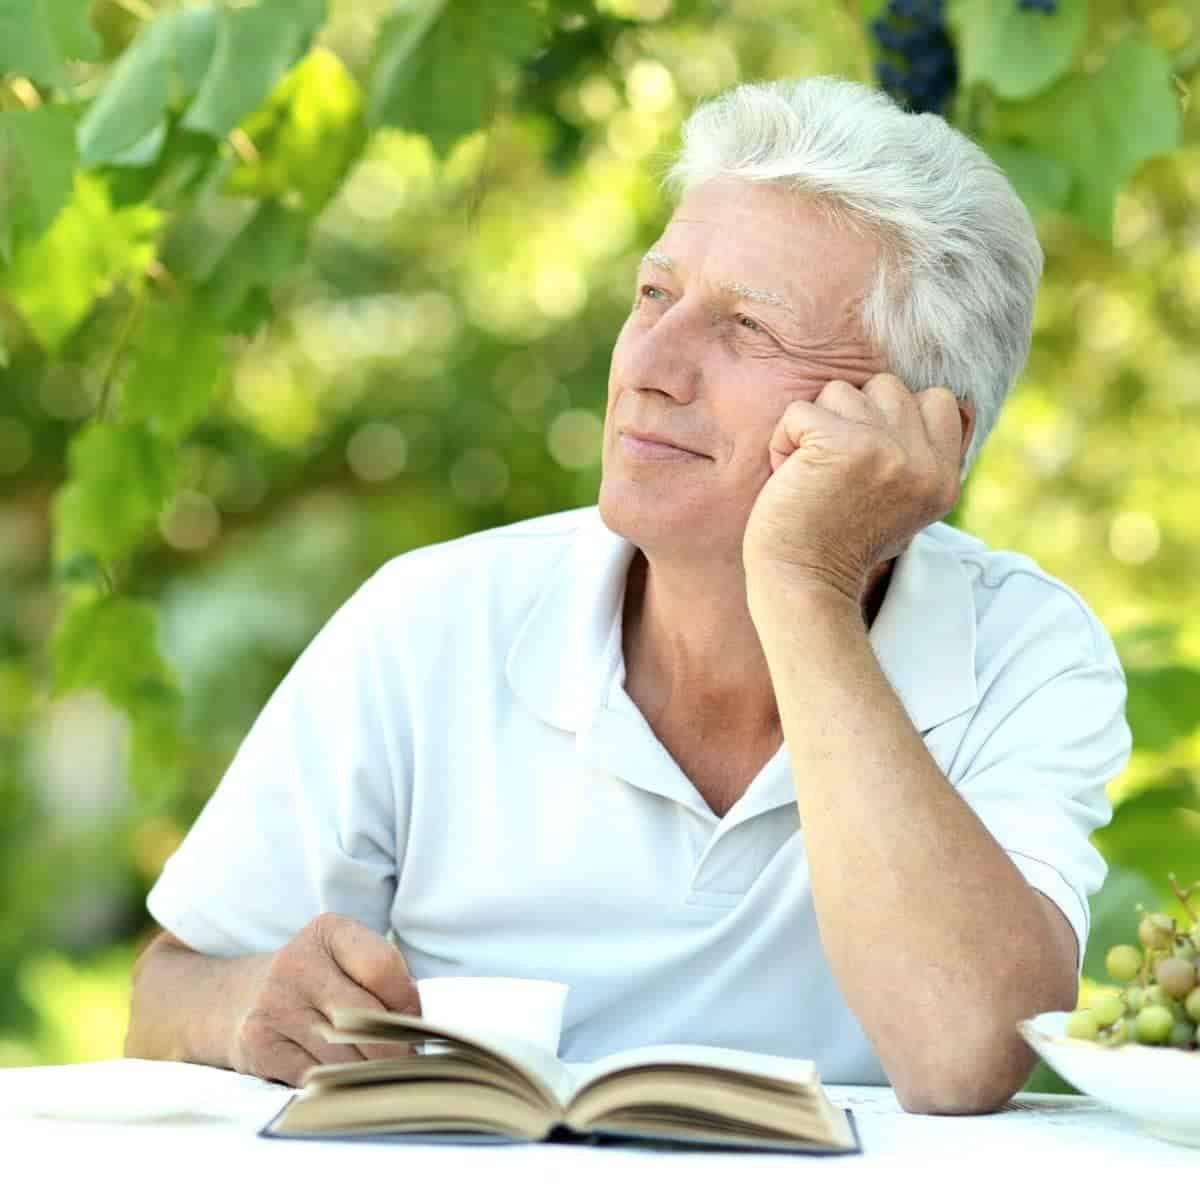 Man sitting at a table with a book outdoors and looking to the side.